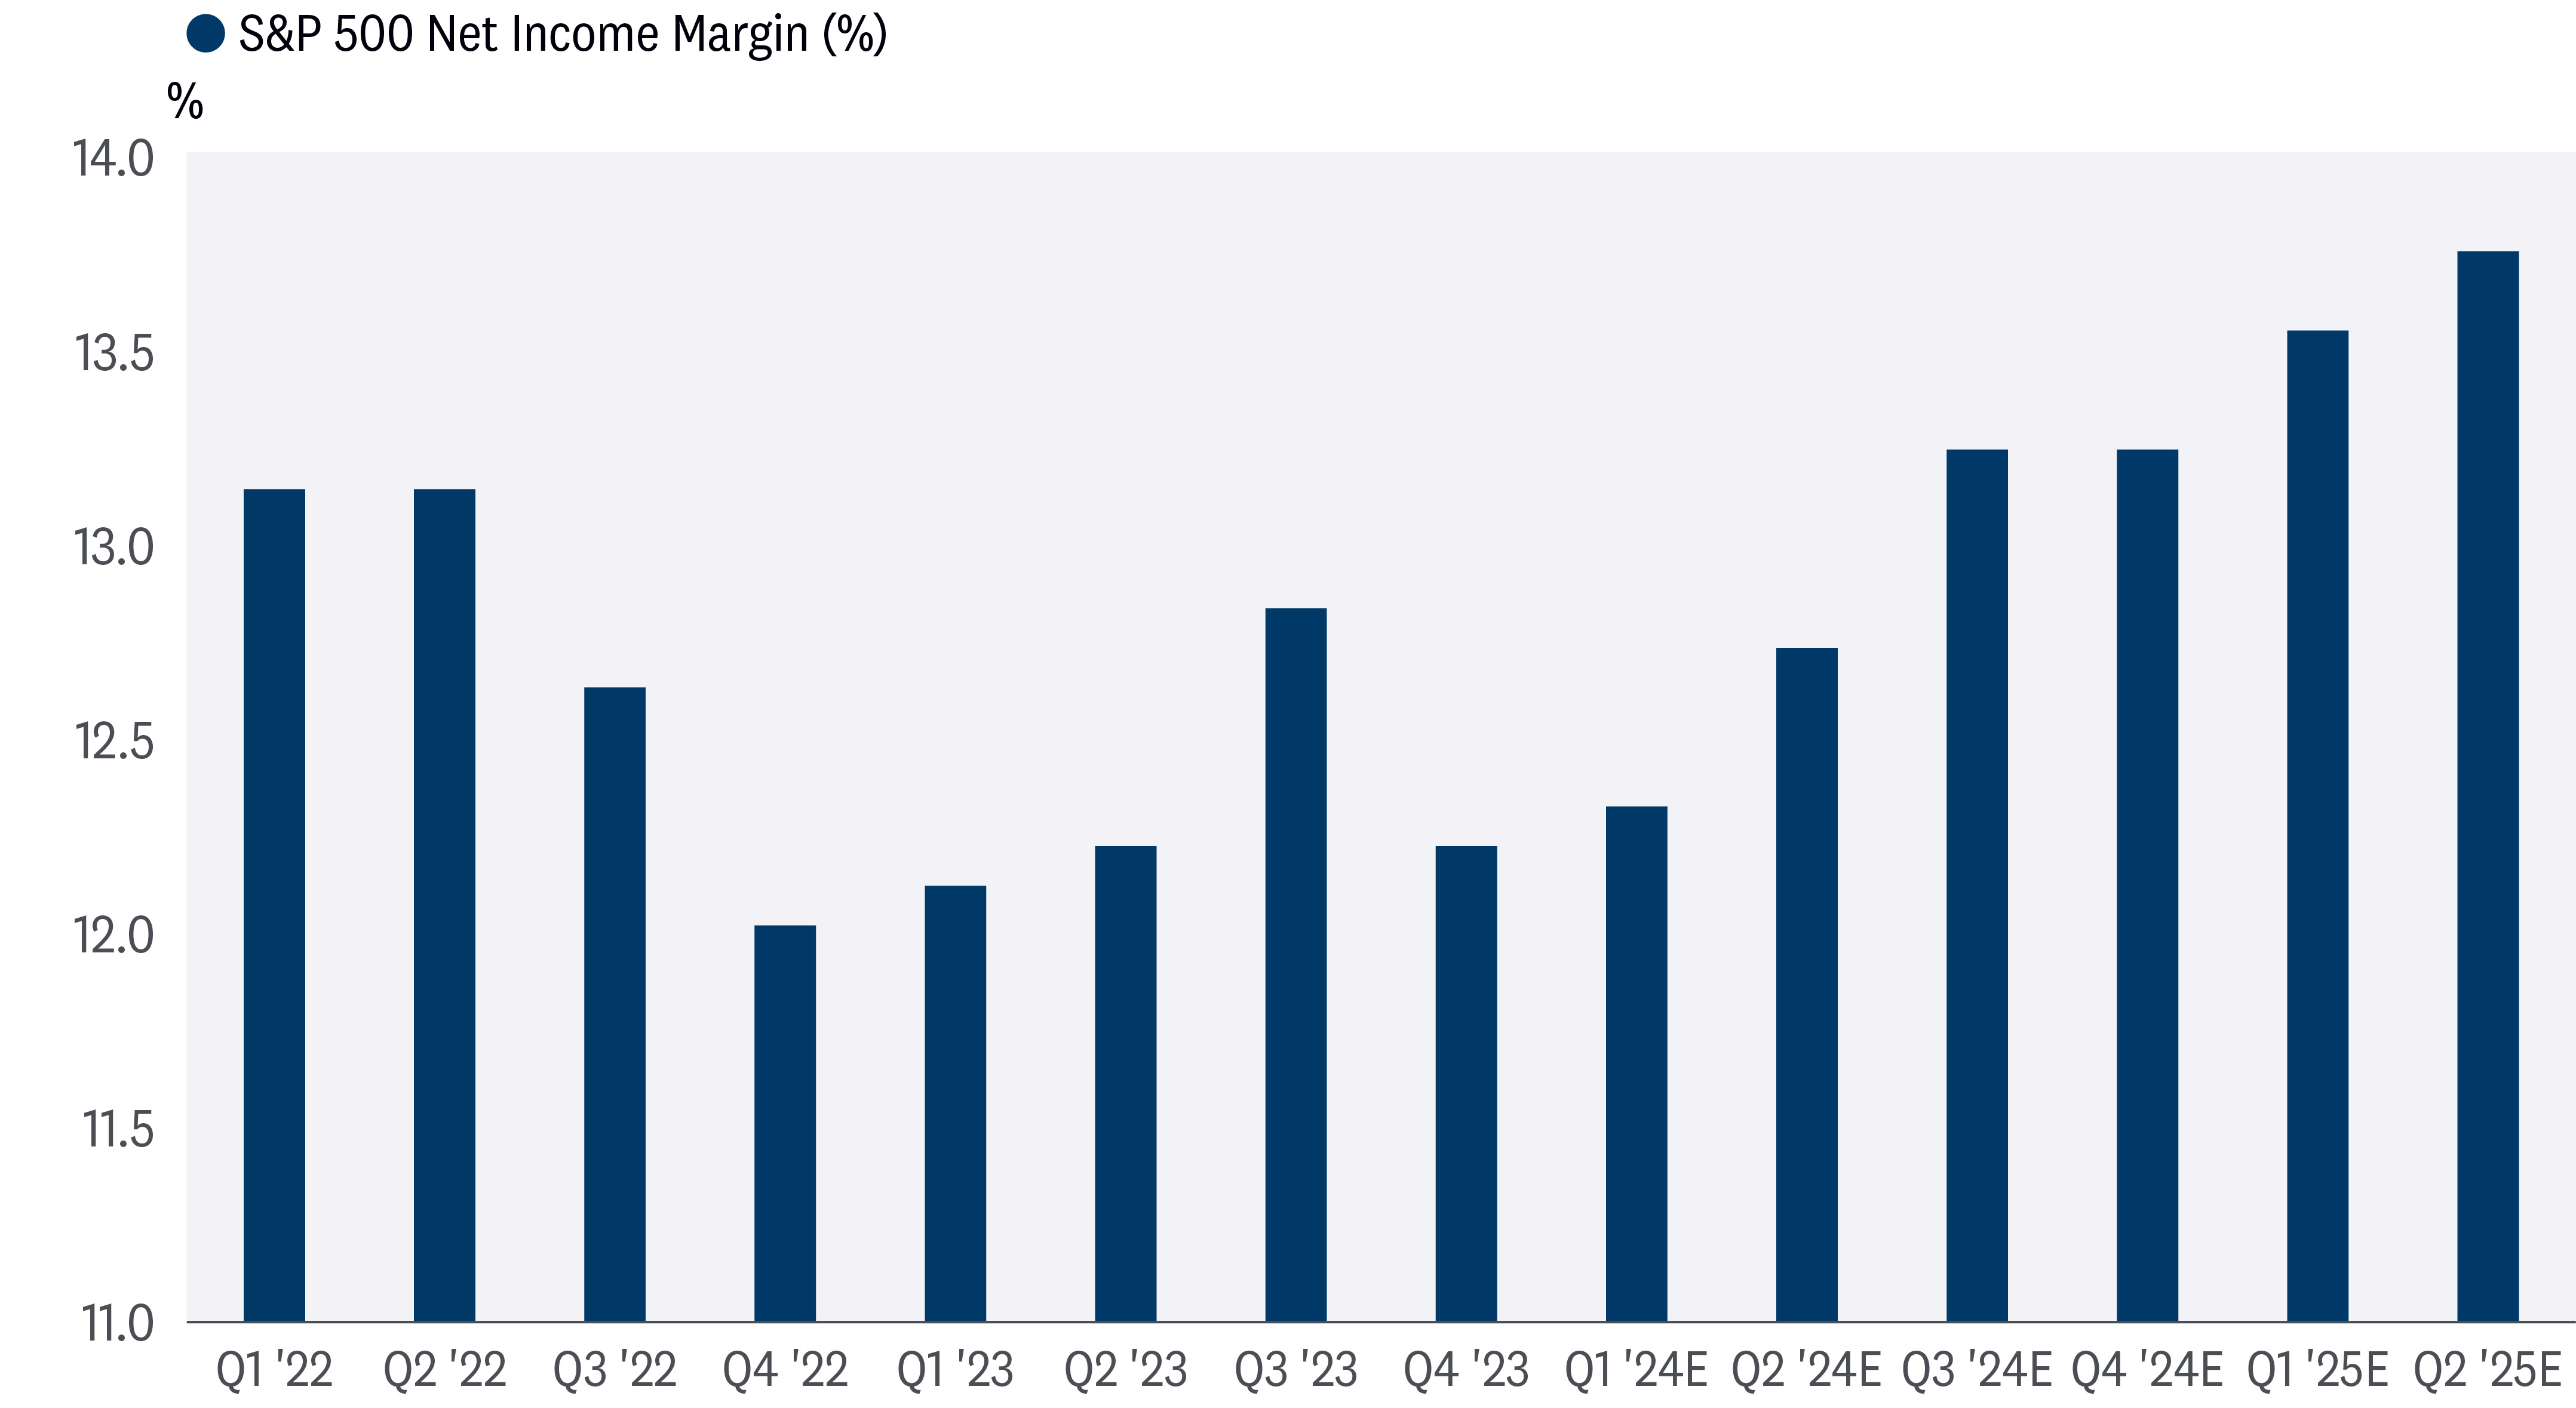 Bar graph depicting S&P 500 net income margin in percentages with actual data from Q1 2022 to Q4 2023 and estimated data from Q1 2024 to Q2 2025.